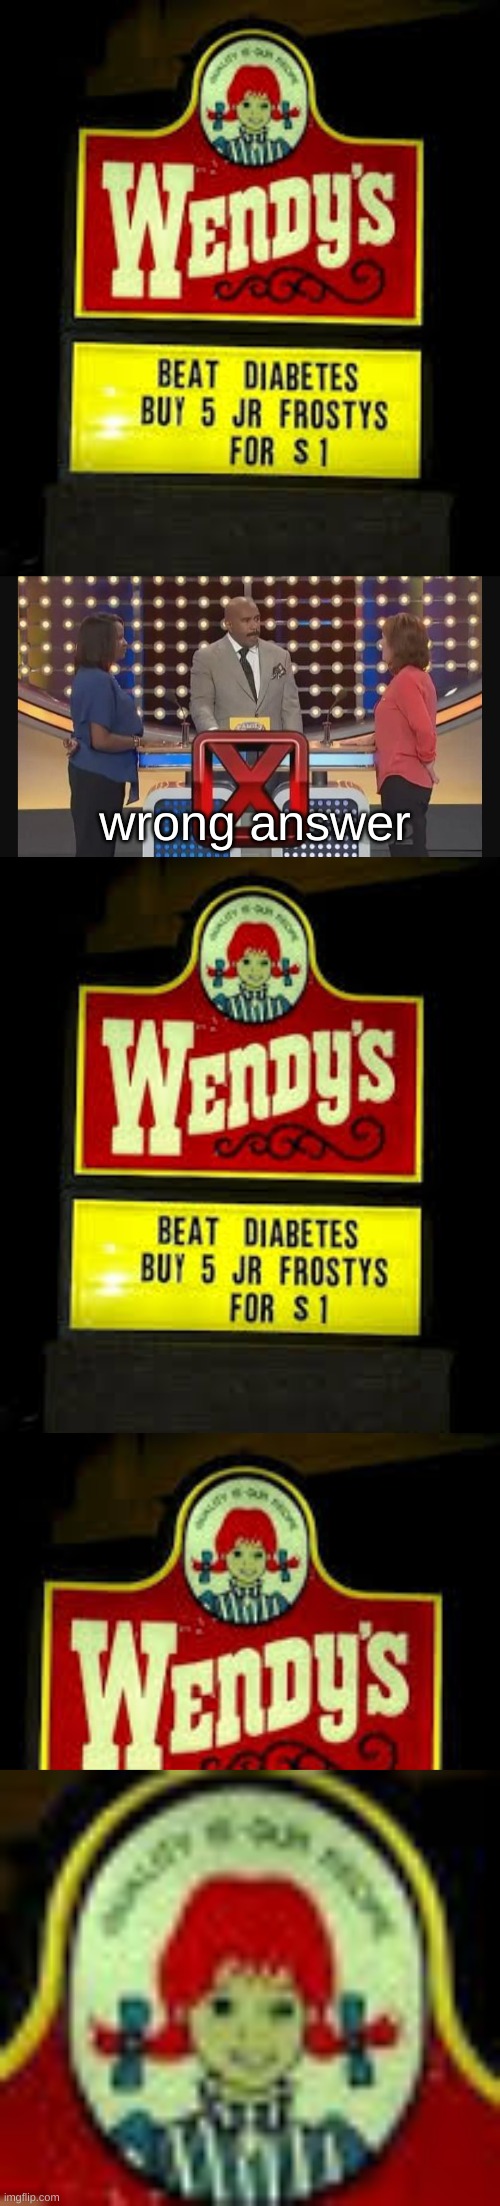 wendy's tryna kill us | wrong answer | image tagged in family feud wrong answer | made w/ Imgflip meme maker